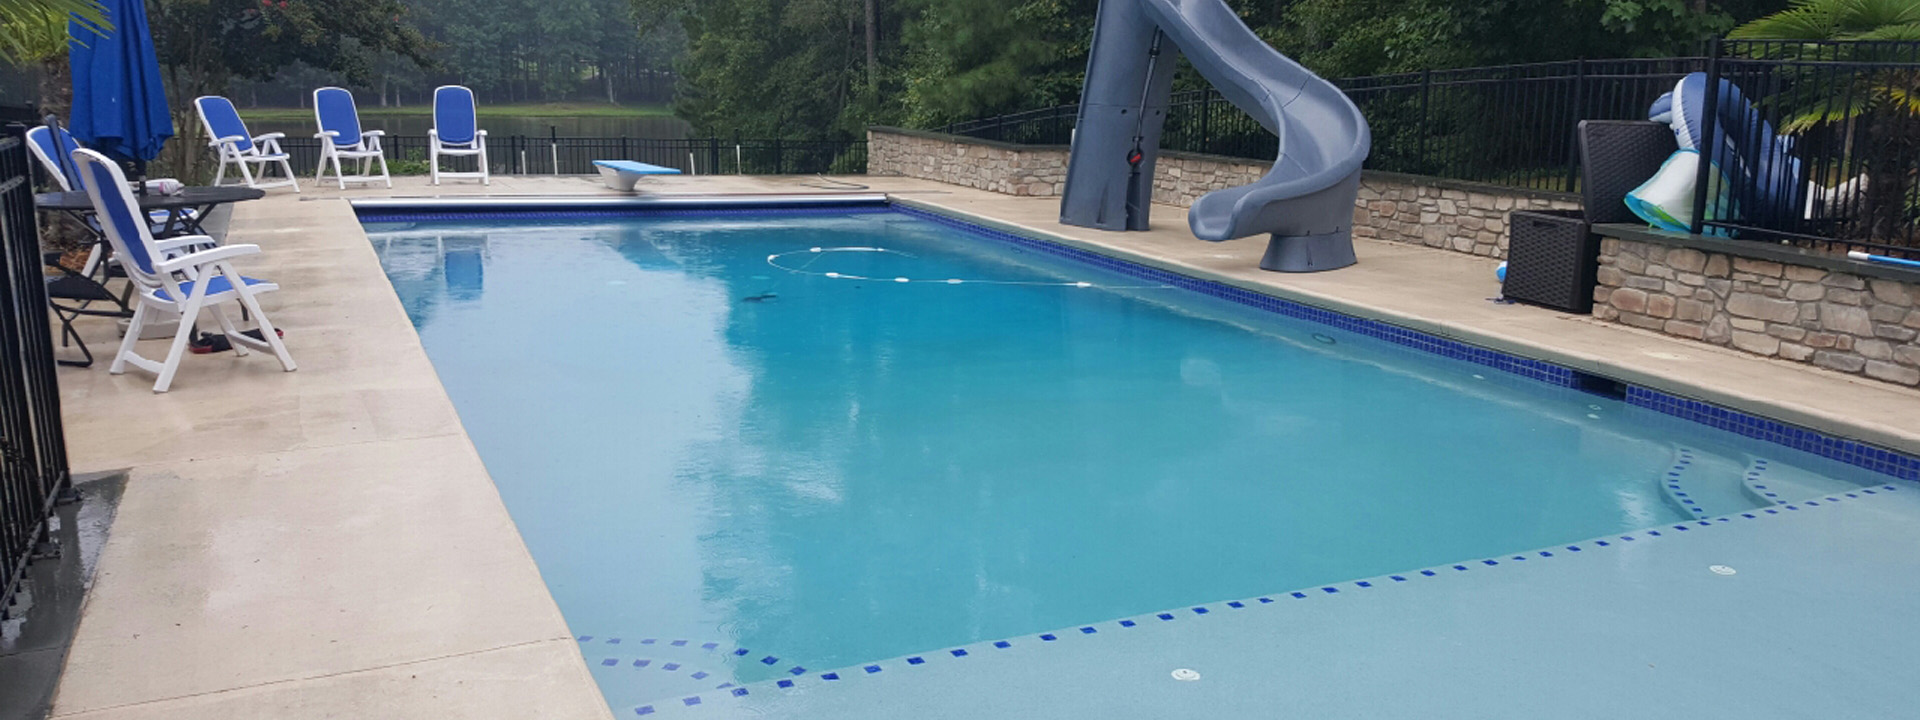 pool specialists service cleaning maintenance repairs